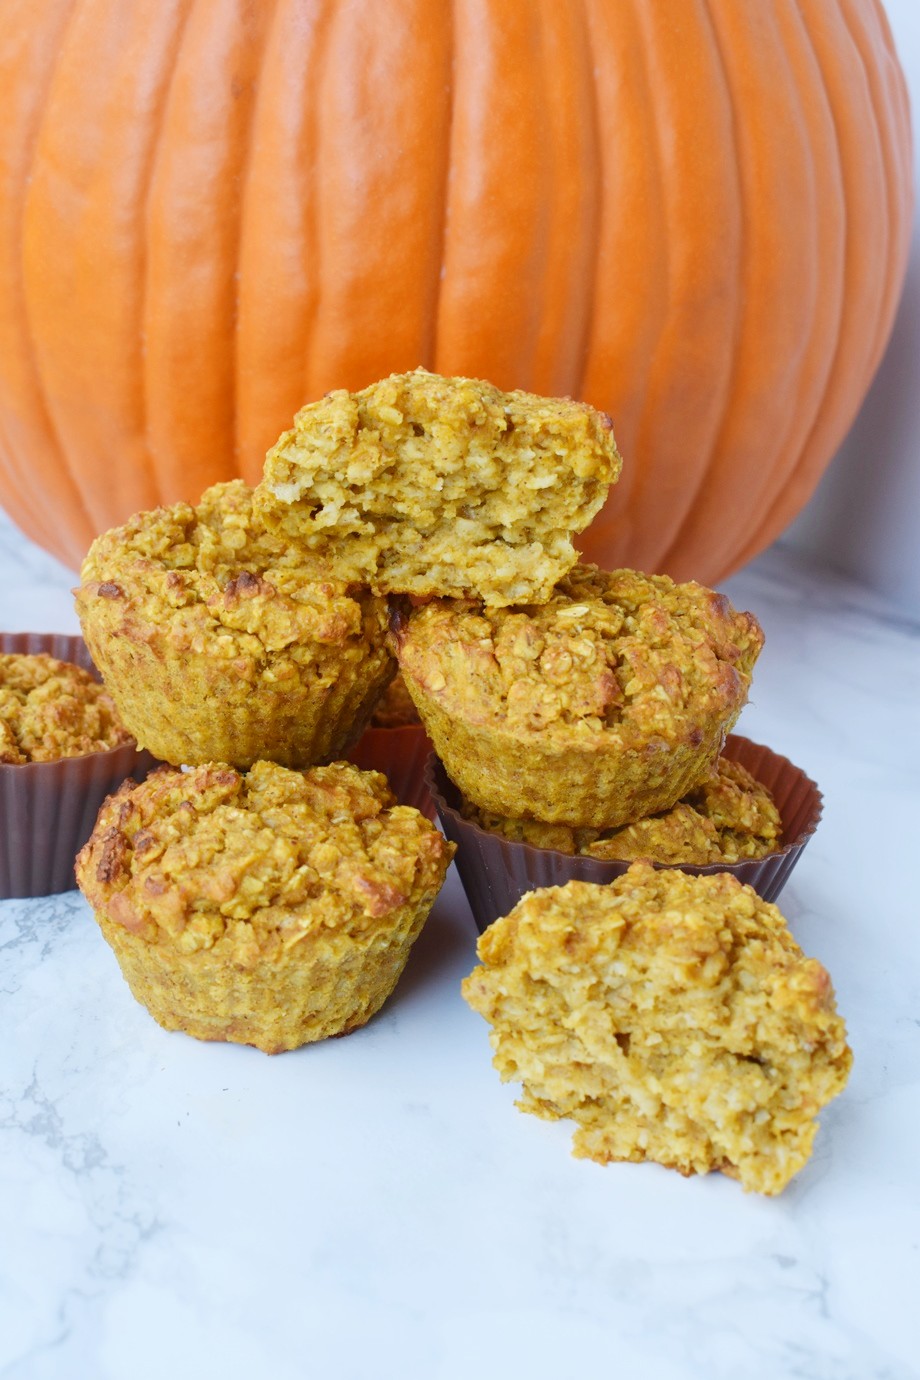 Pumpkin Baked Oatmeal Cups are loaded with real pumpkin and pumpkin spice flavors, are perfect for meal prep and are packed with nutrients for a healthy breakfast! #pumpkin #pumpkinspice #oats #oatmeal #bakedoatmeal #mealprep #healthy #cleaneating